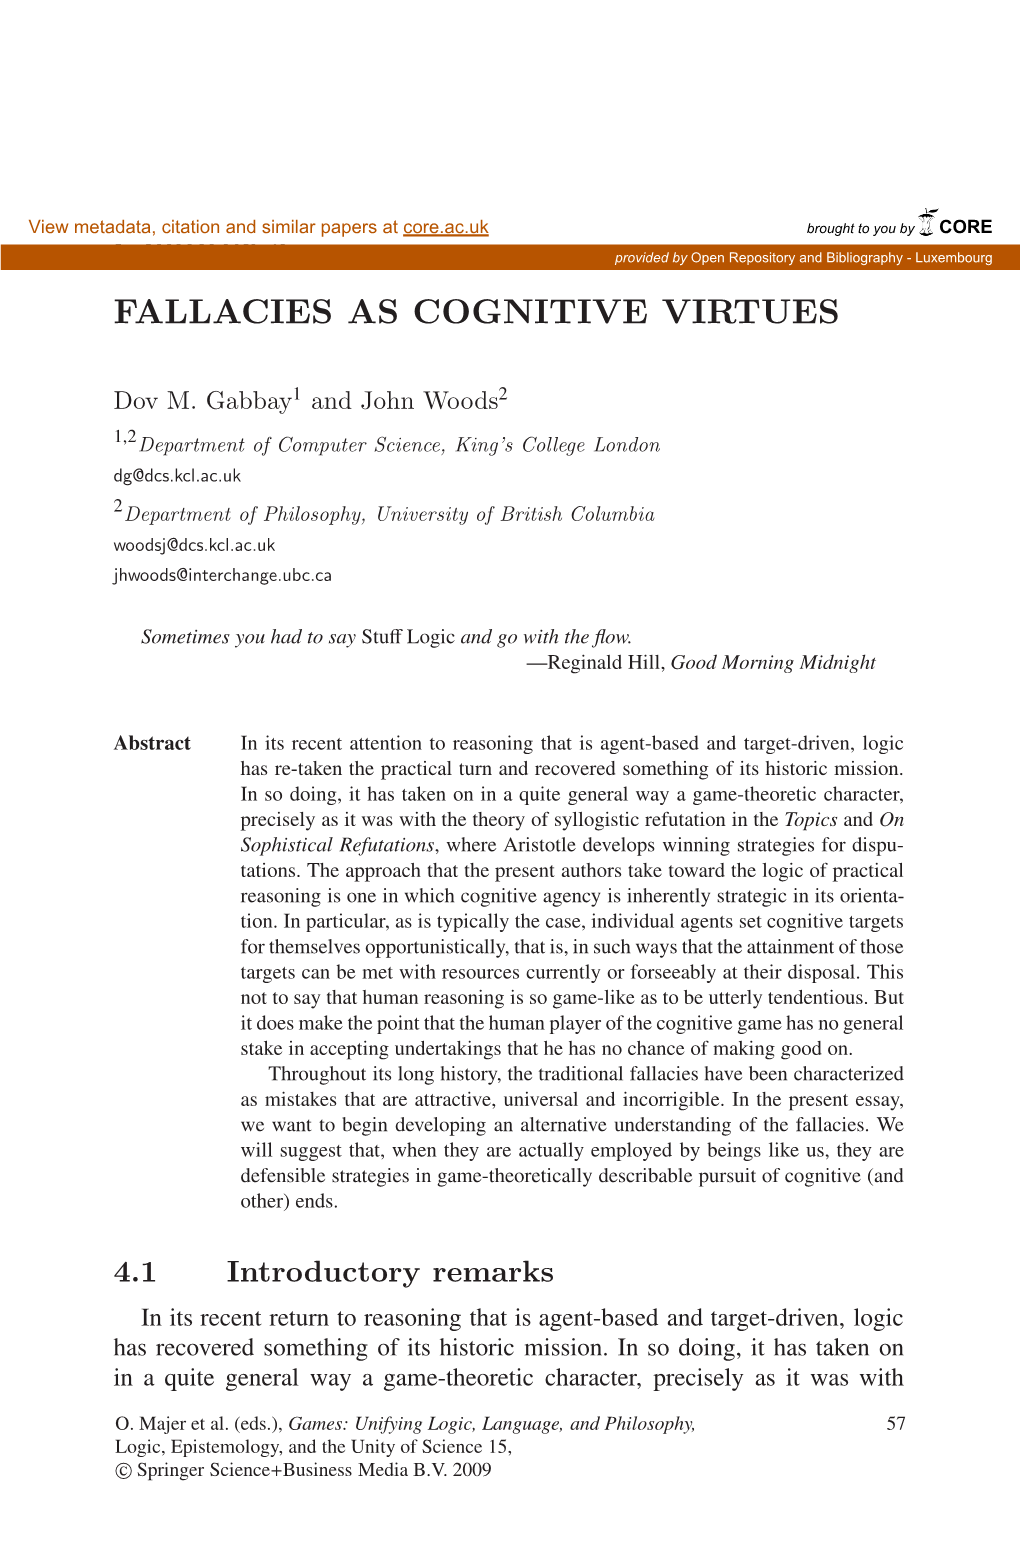 Chapter 4 FALLACIES AS COGNITIVE VIRTUES